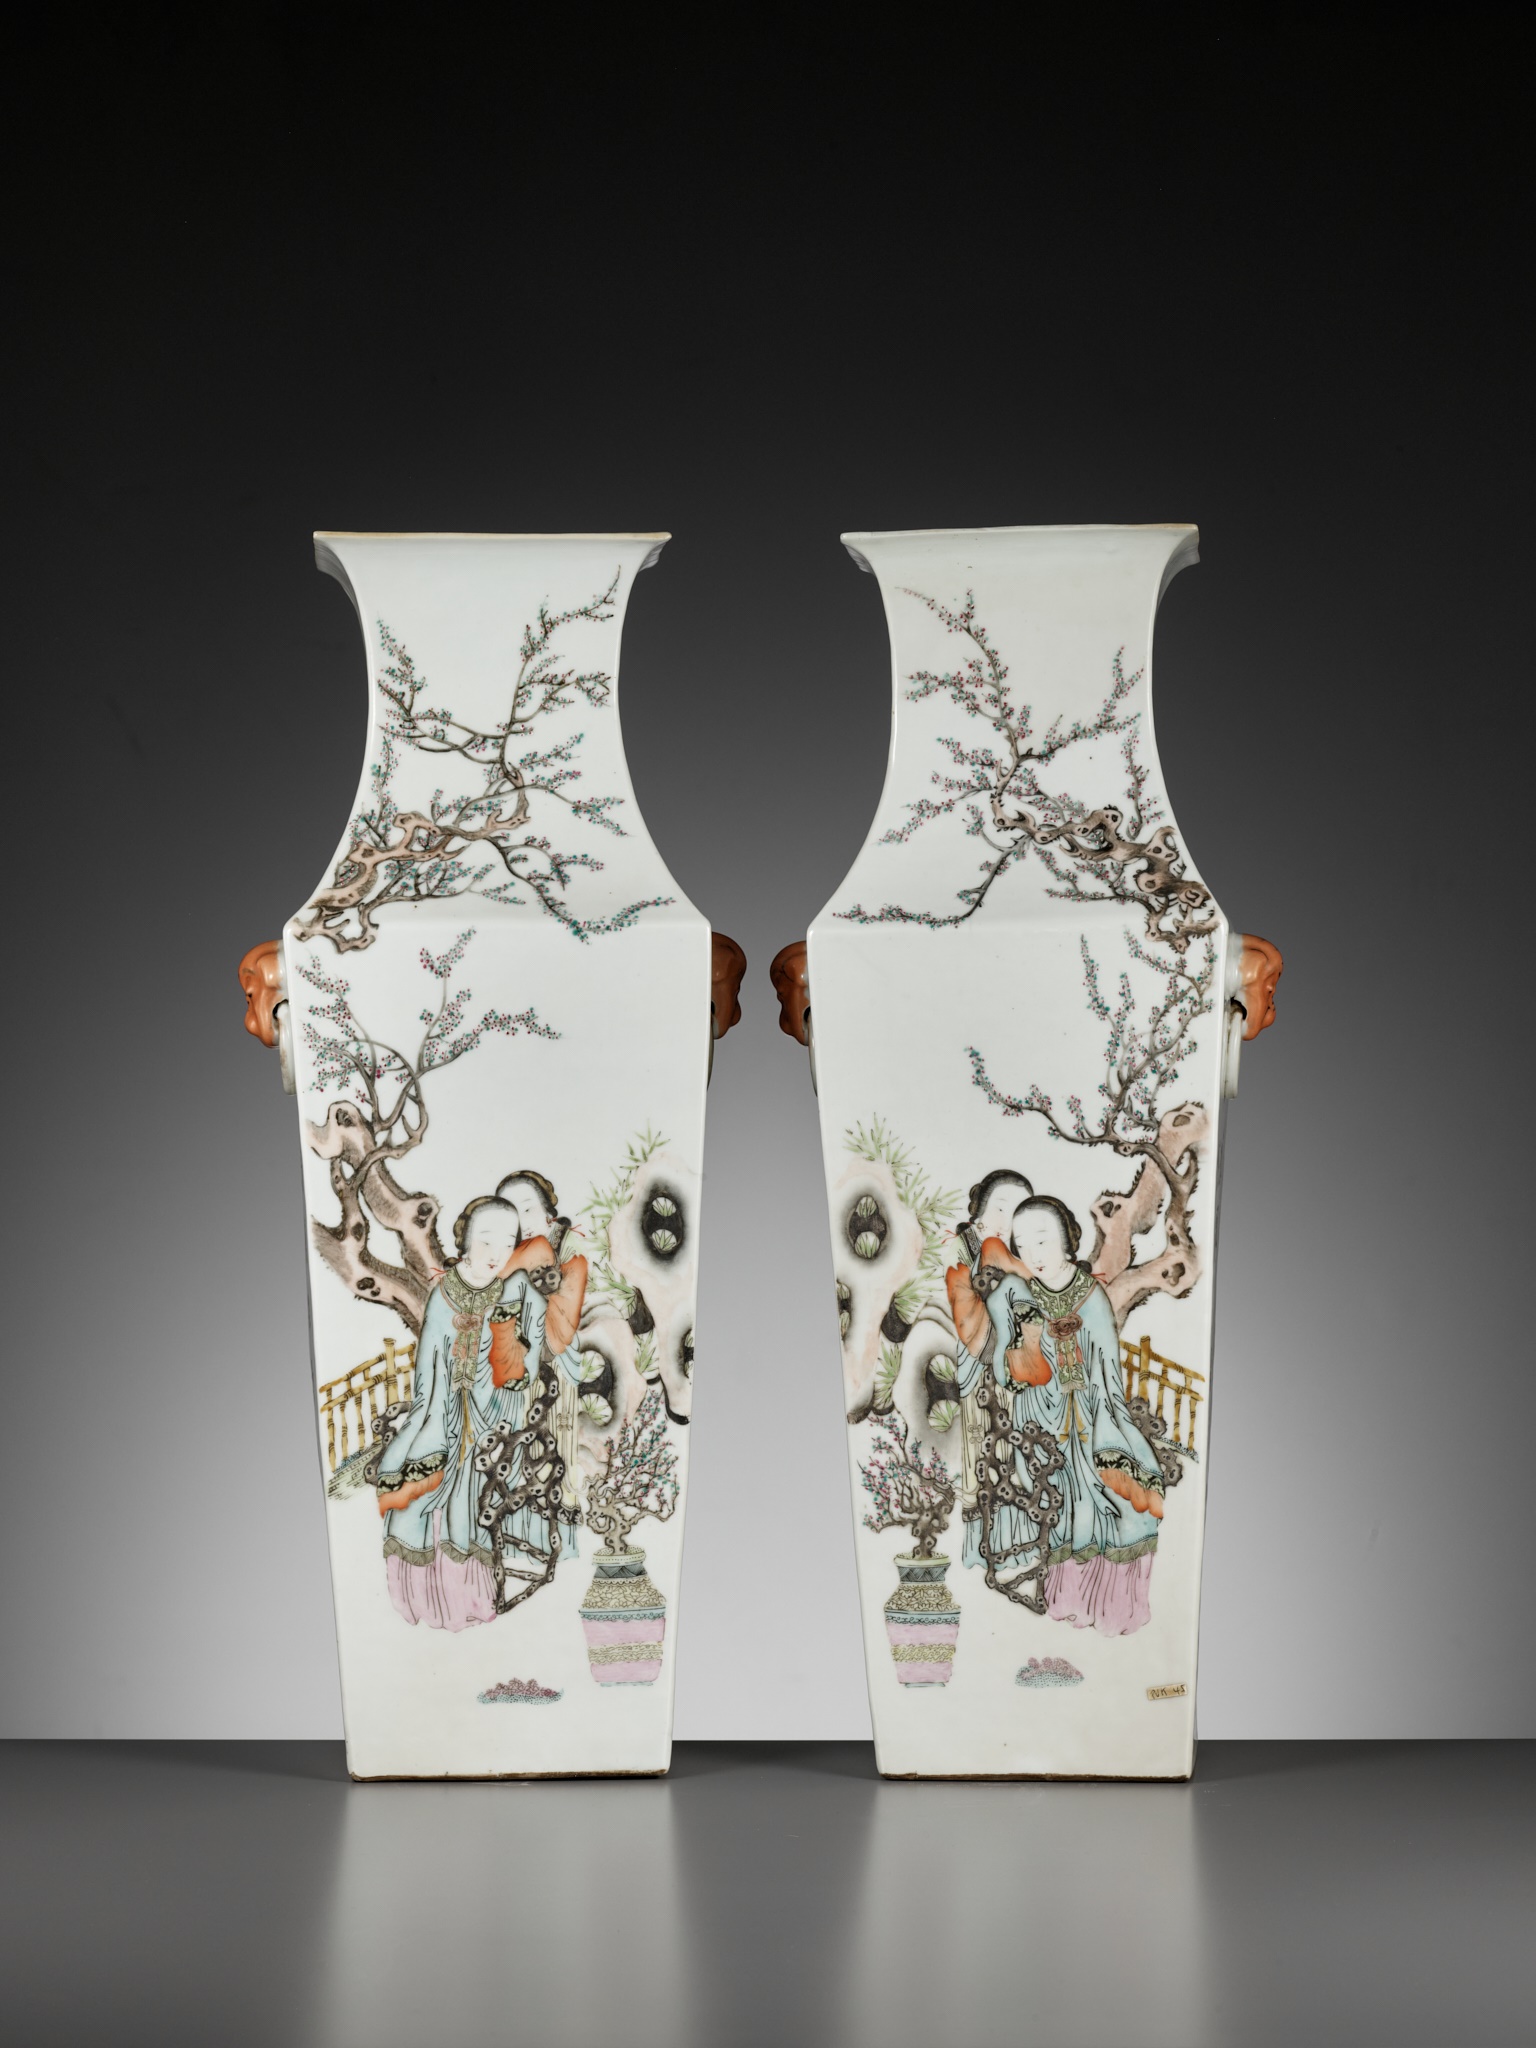 A PAIR OF LARGE QIANJIANG CAI VASES, BY FANG JIAZHEN, CHINA, DATED 1895 - Image 9 of 17